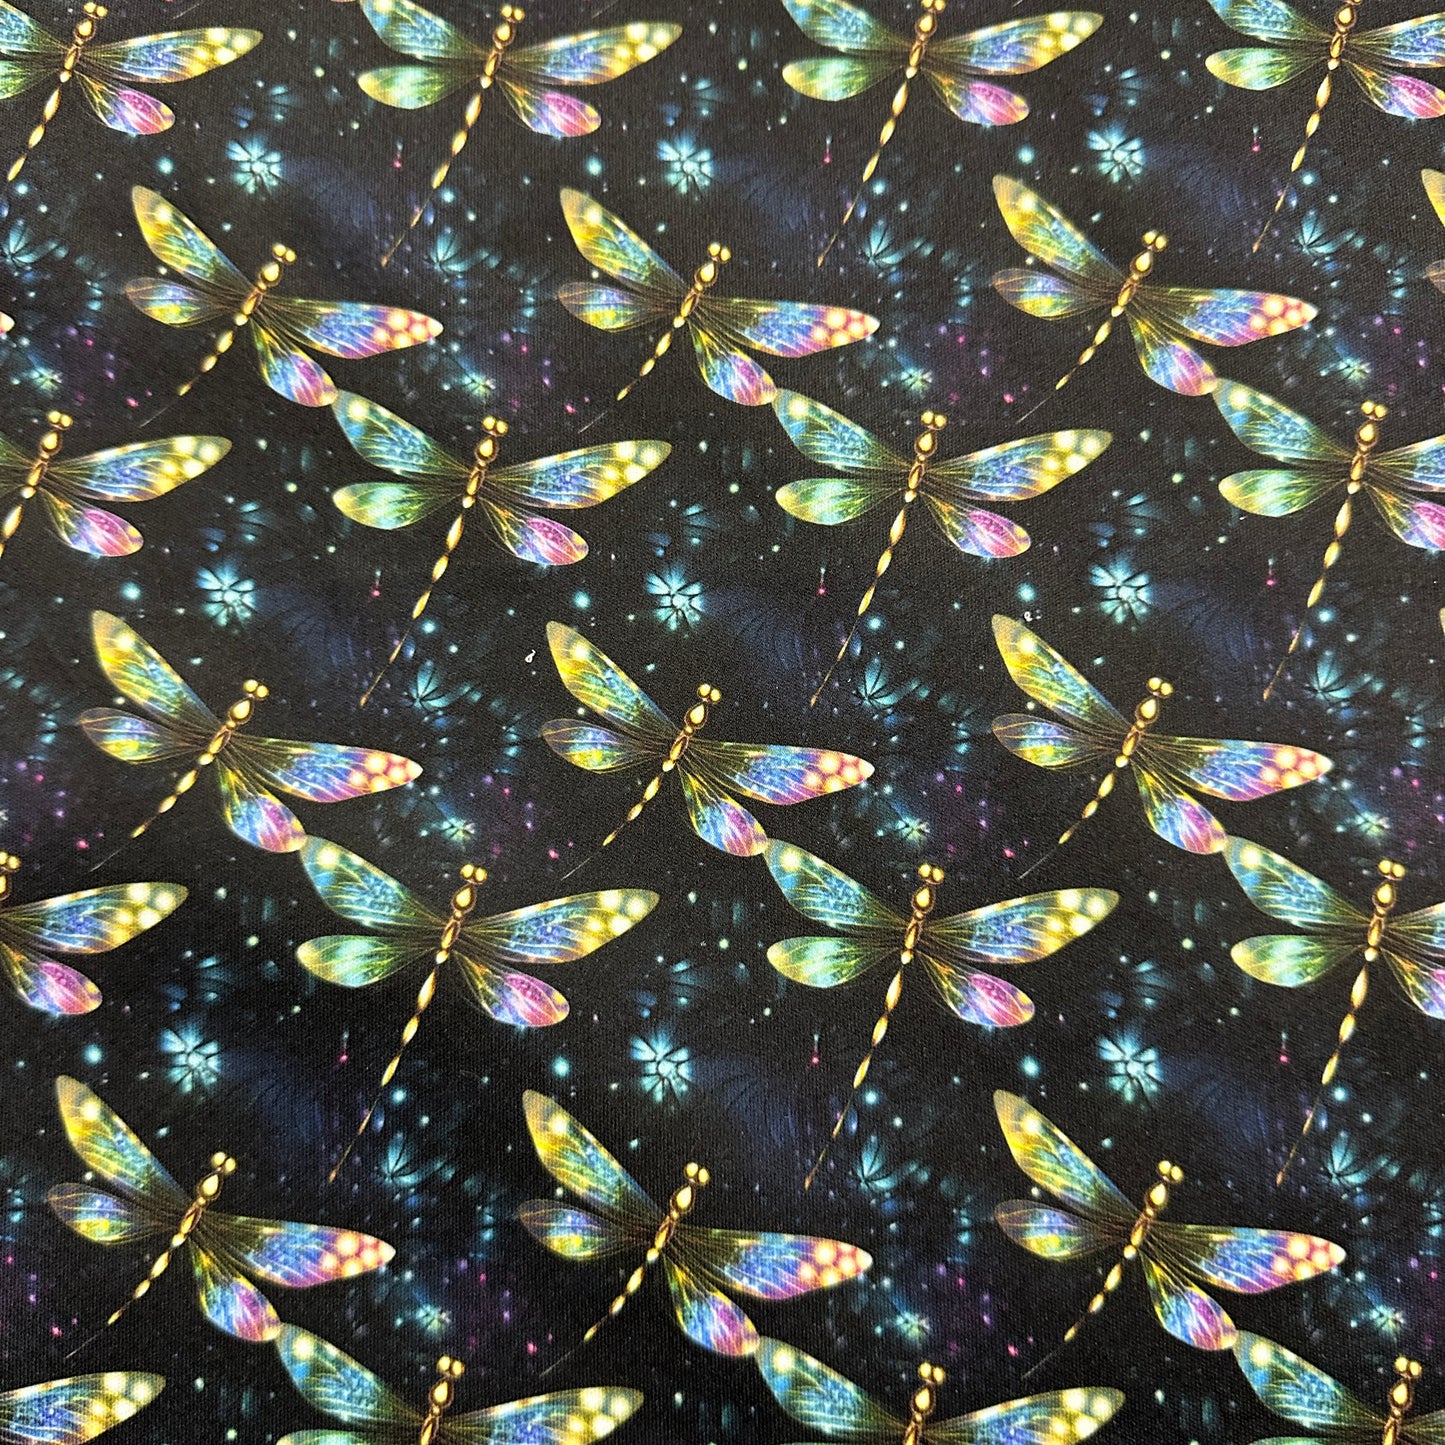 Shimmering Dragonflies 1 mil PUL Fabric - Made in the USA